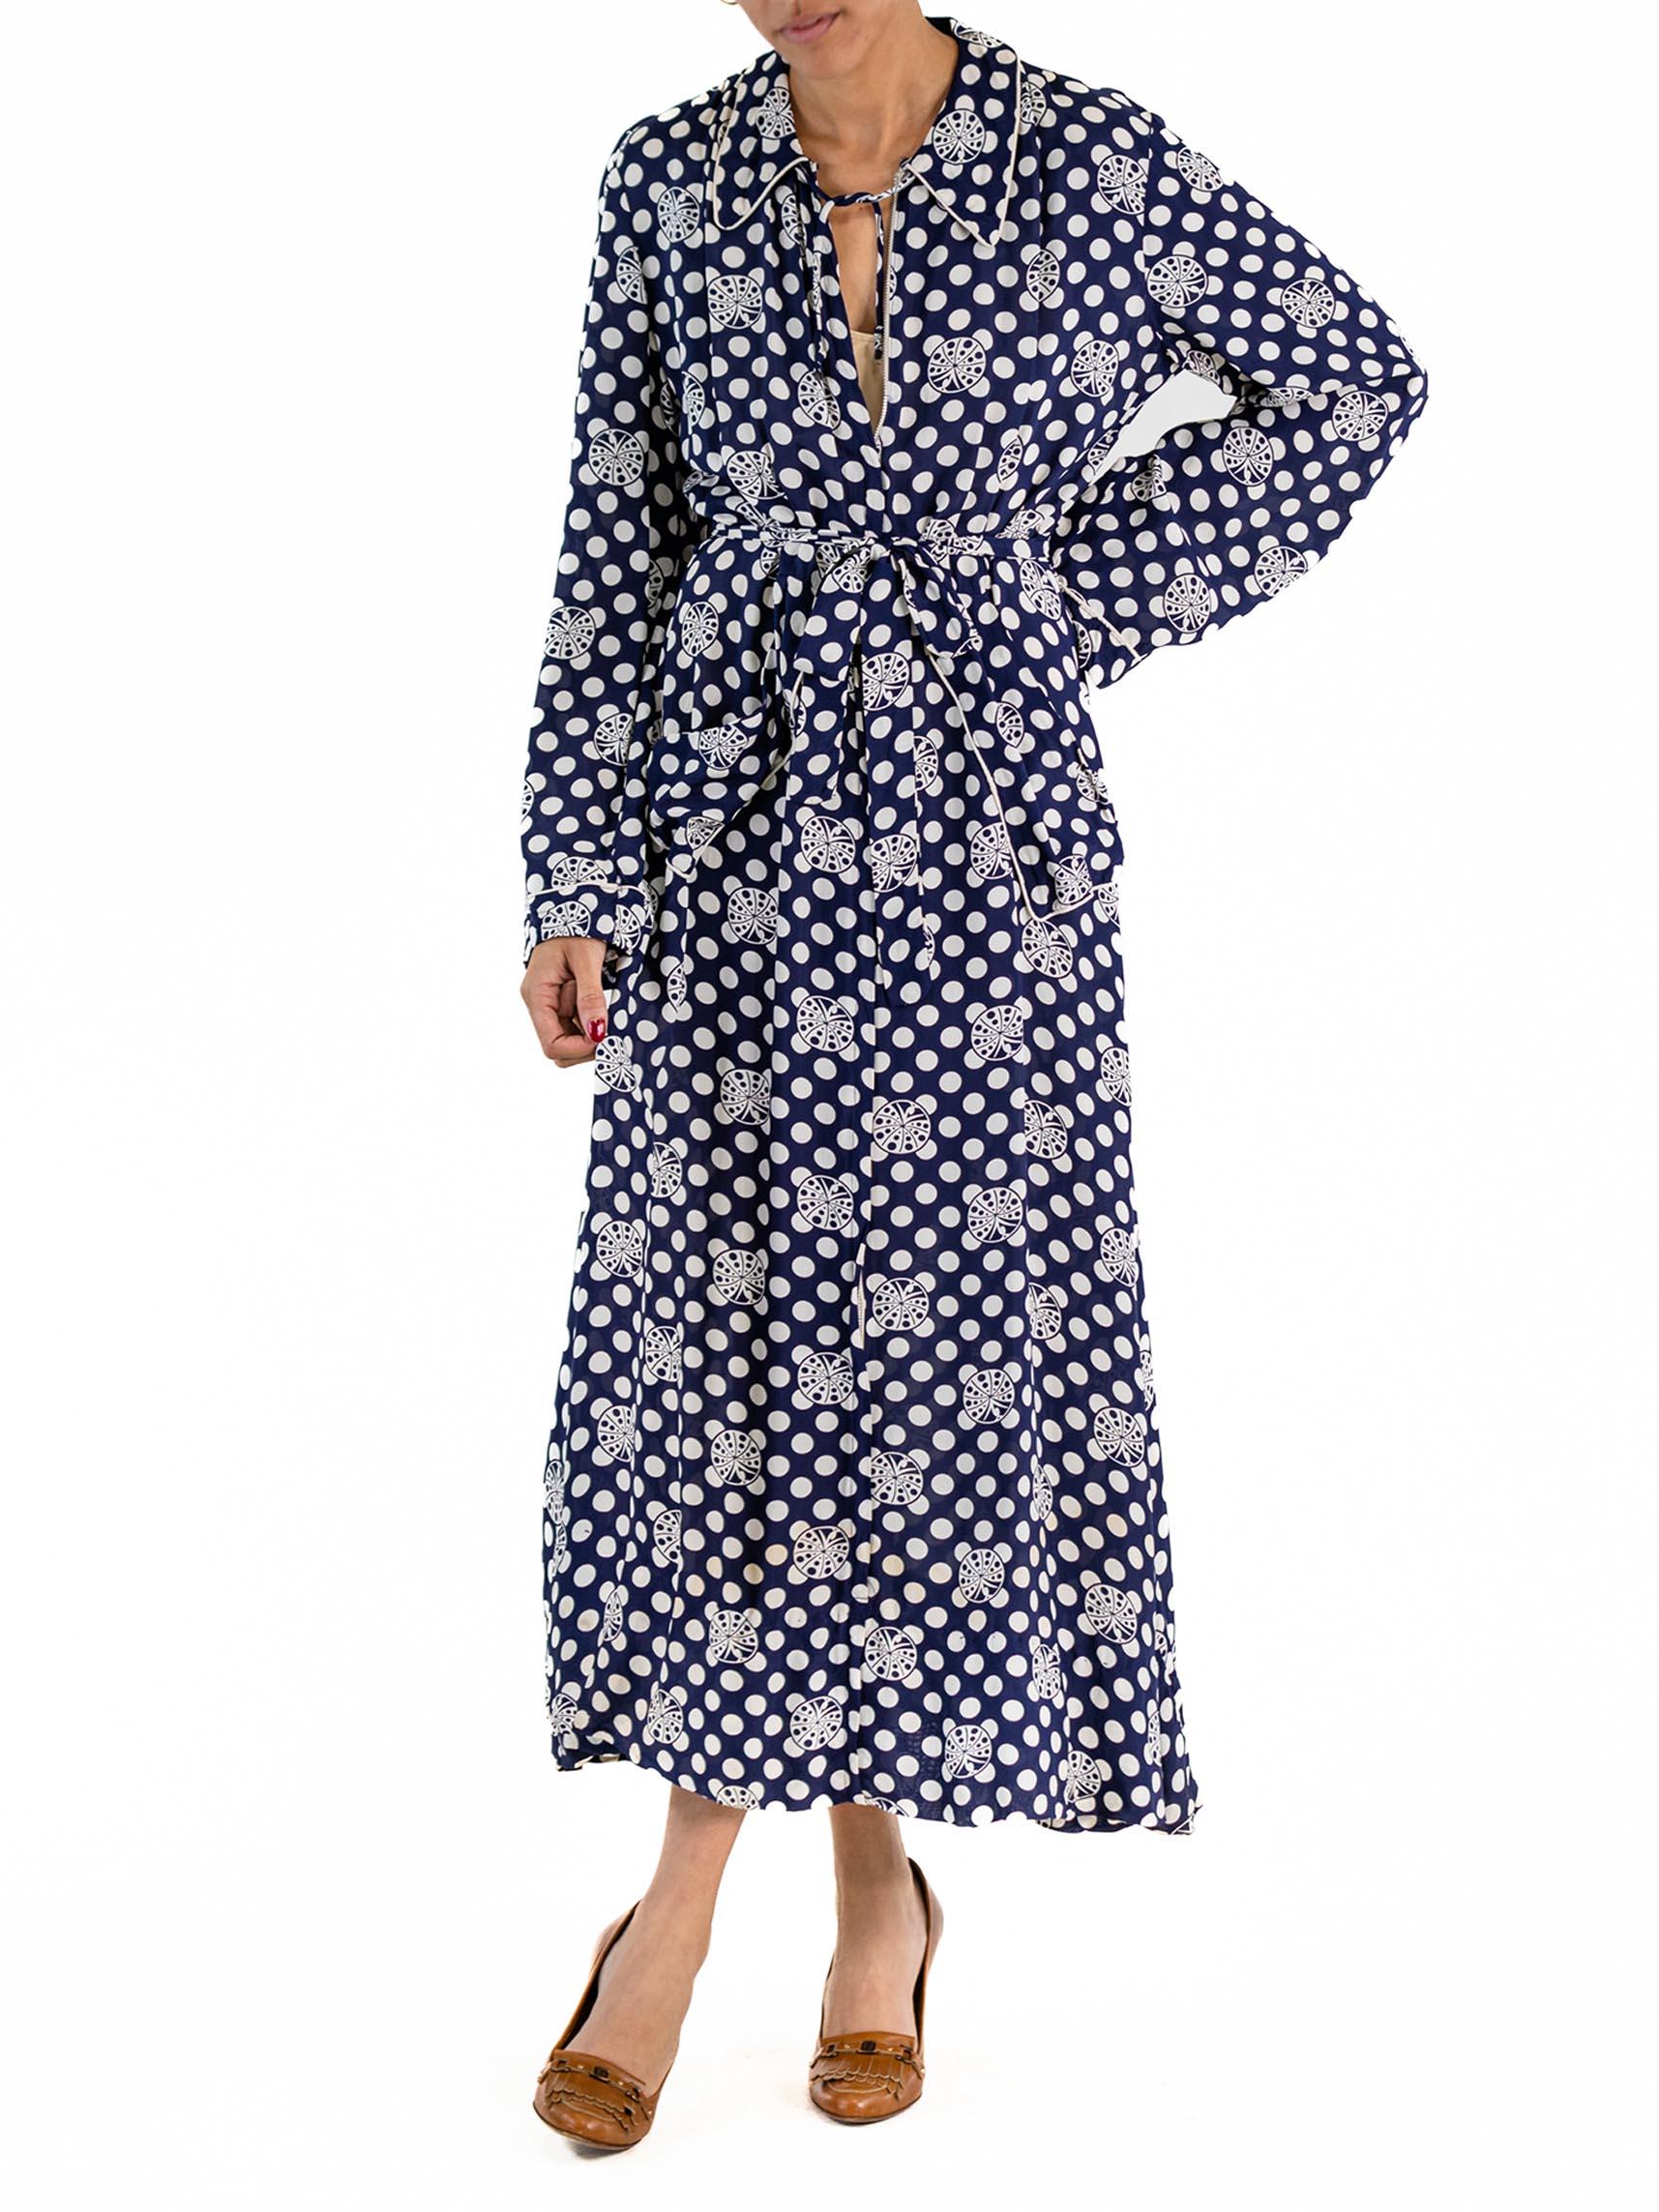 1940S Blue & White Cold Rayon Polka Dot Dress With Zipper Front Pockets For Sale 2